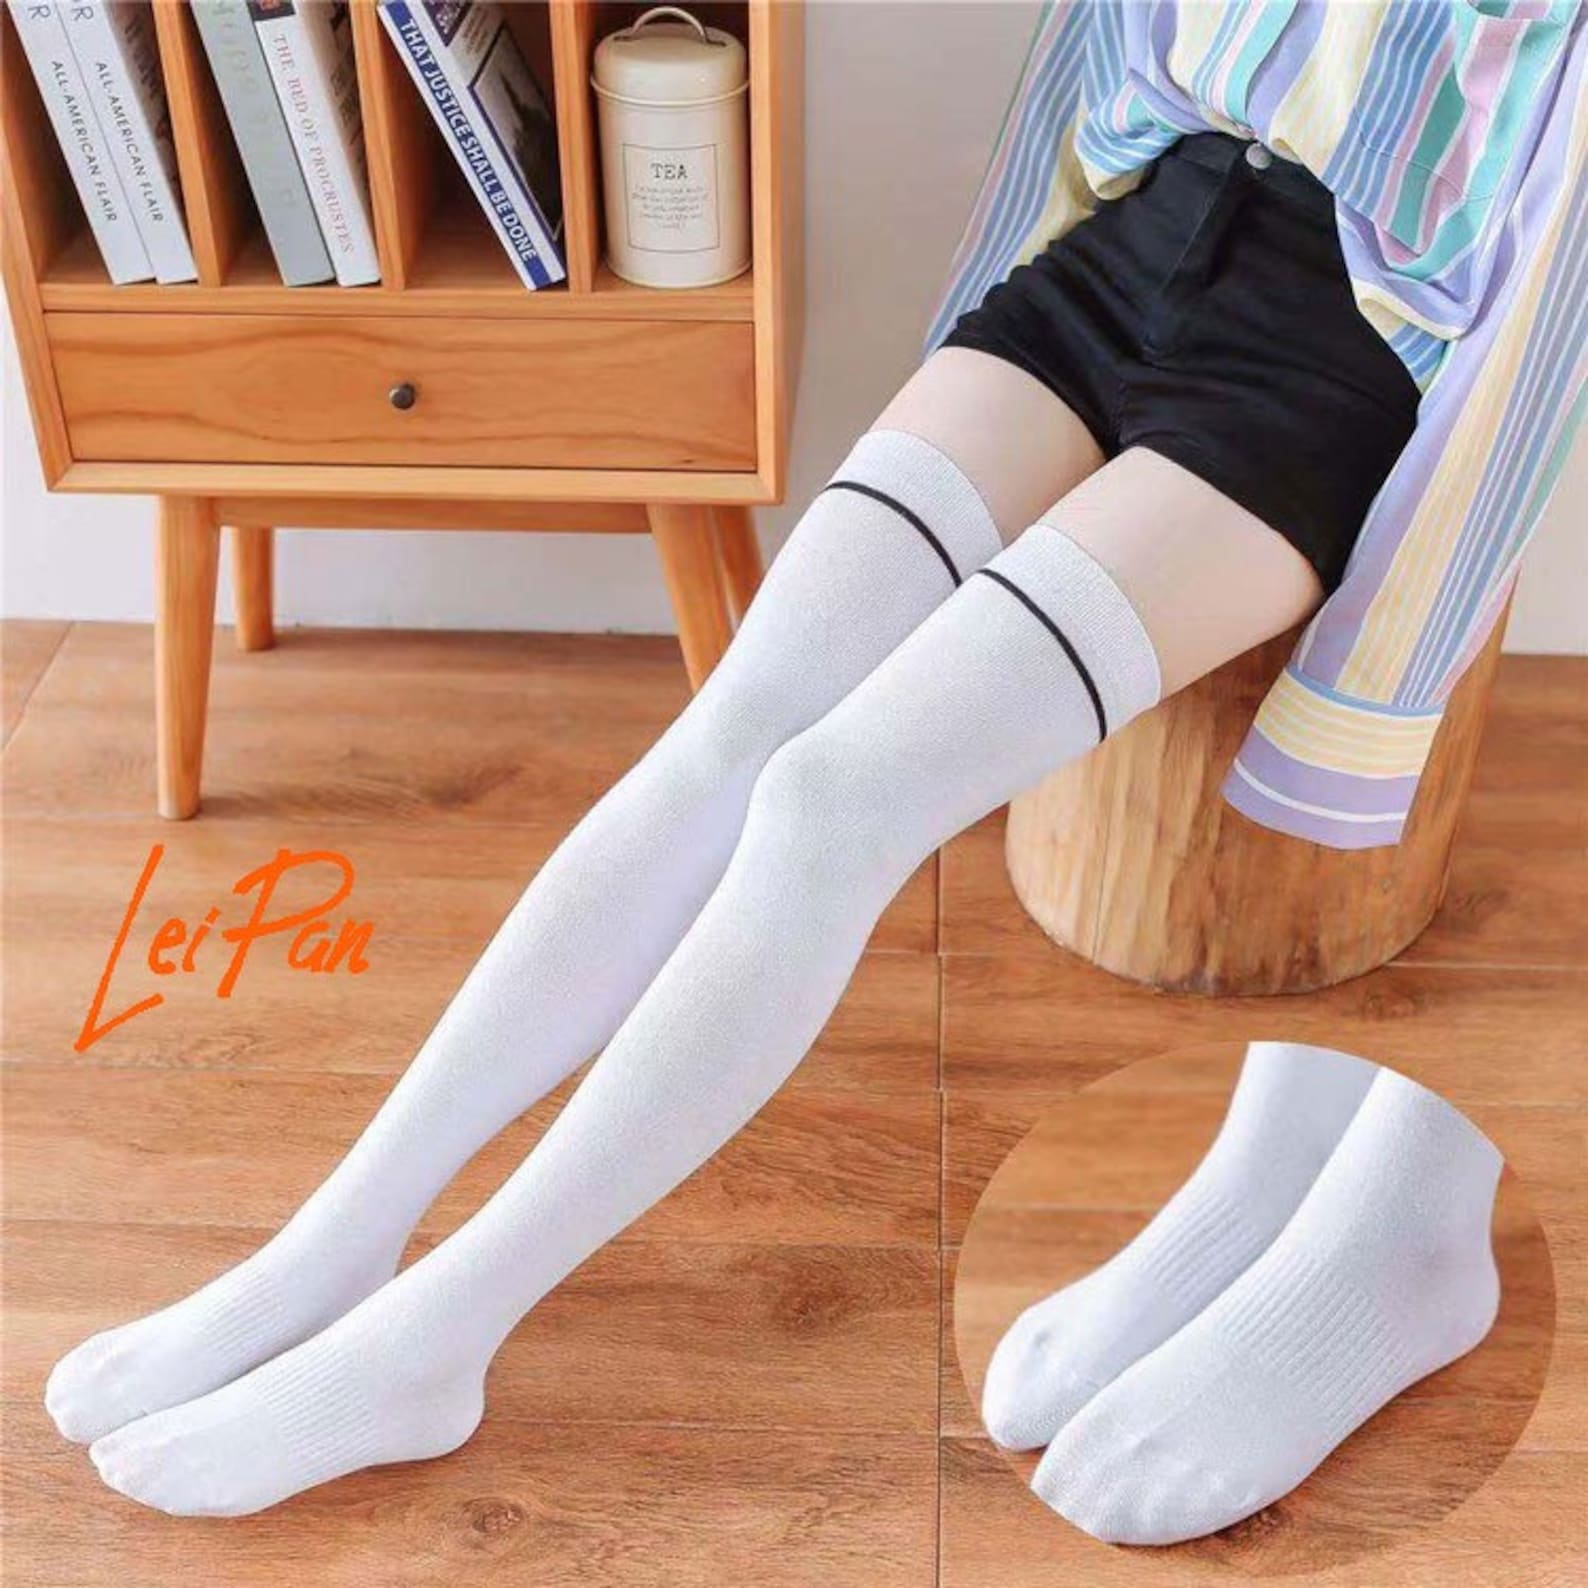 Long Knee High Stocks Women Cosplay Solid Color Sexy Janpanse | Etsy